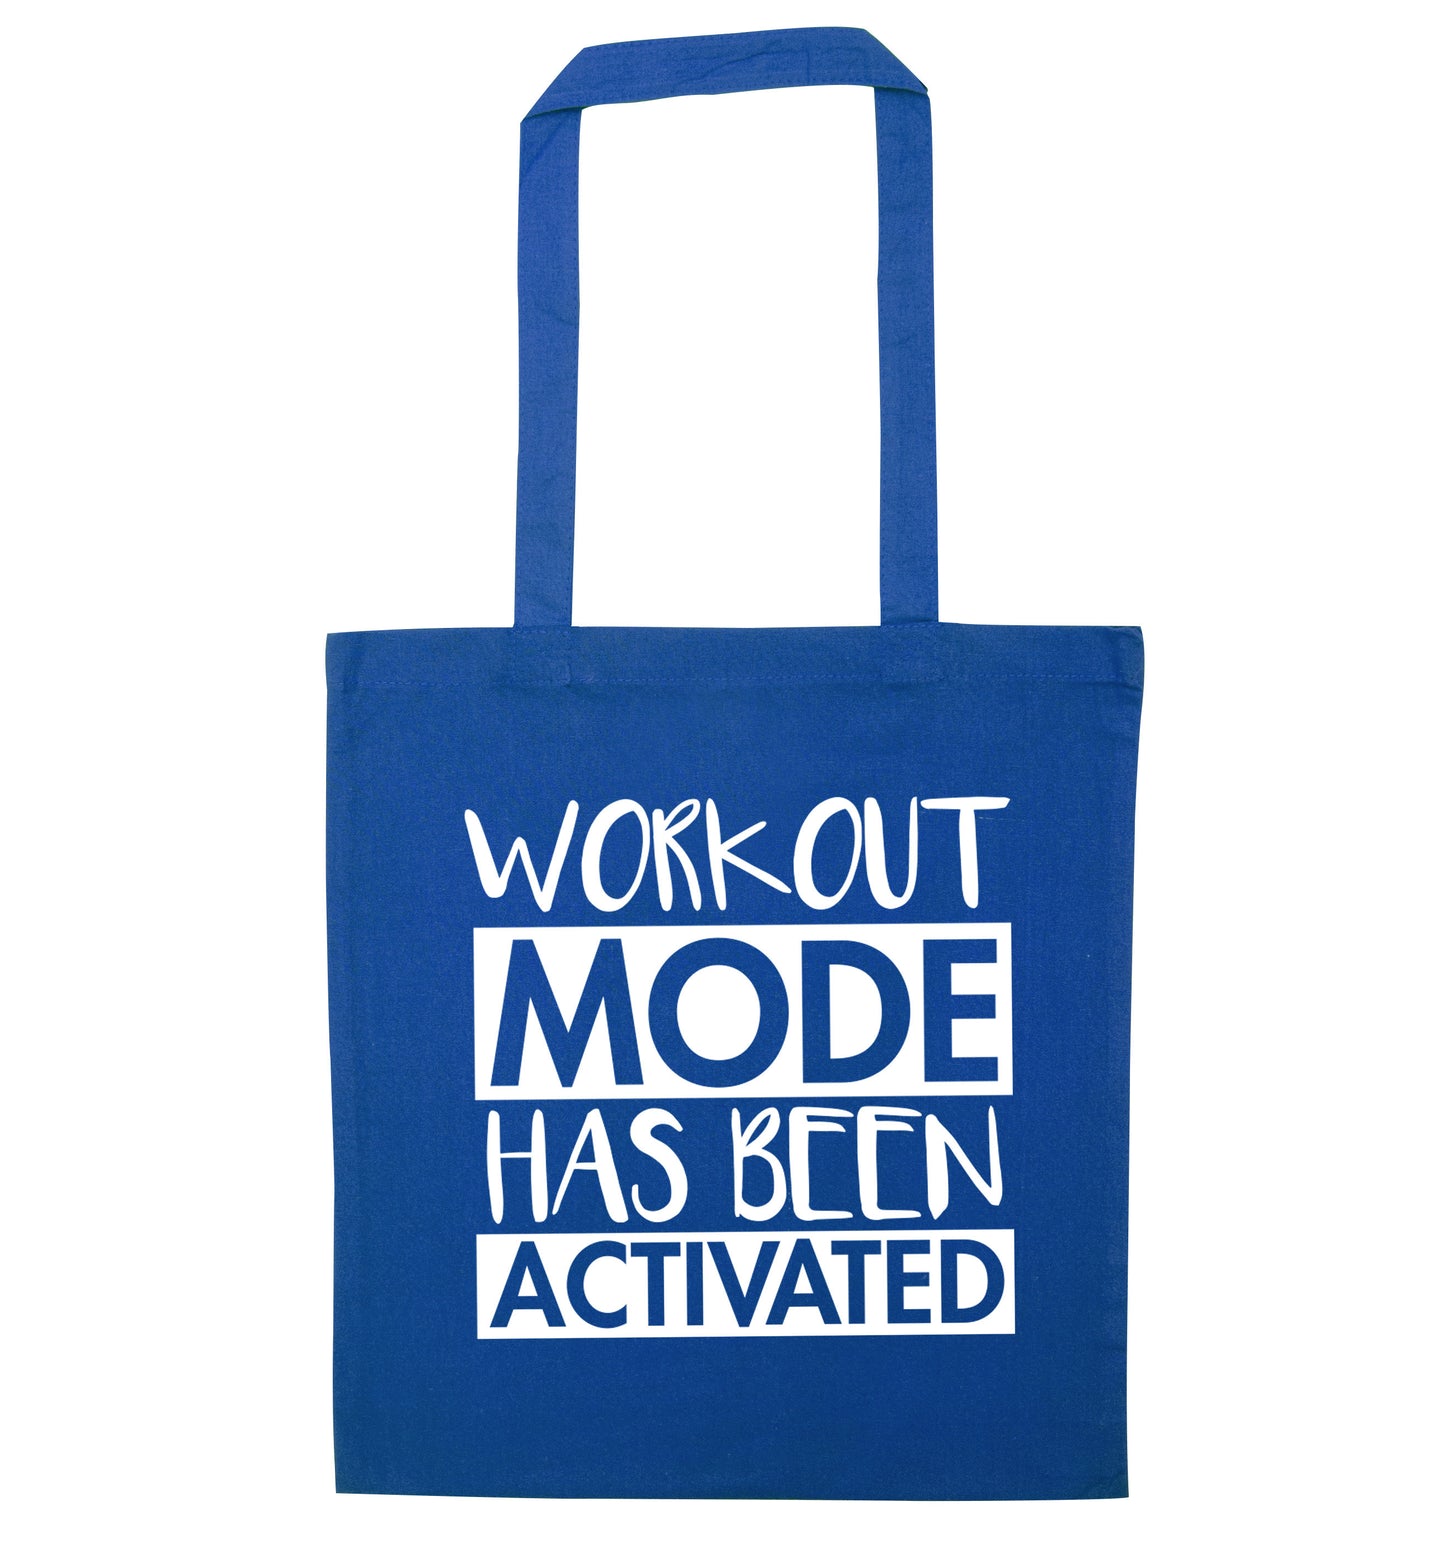 Workout mode has been activated blue tote bag